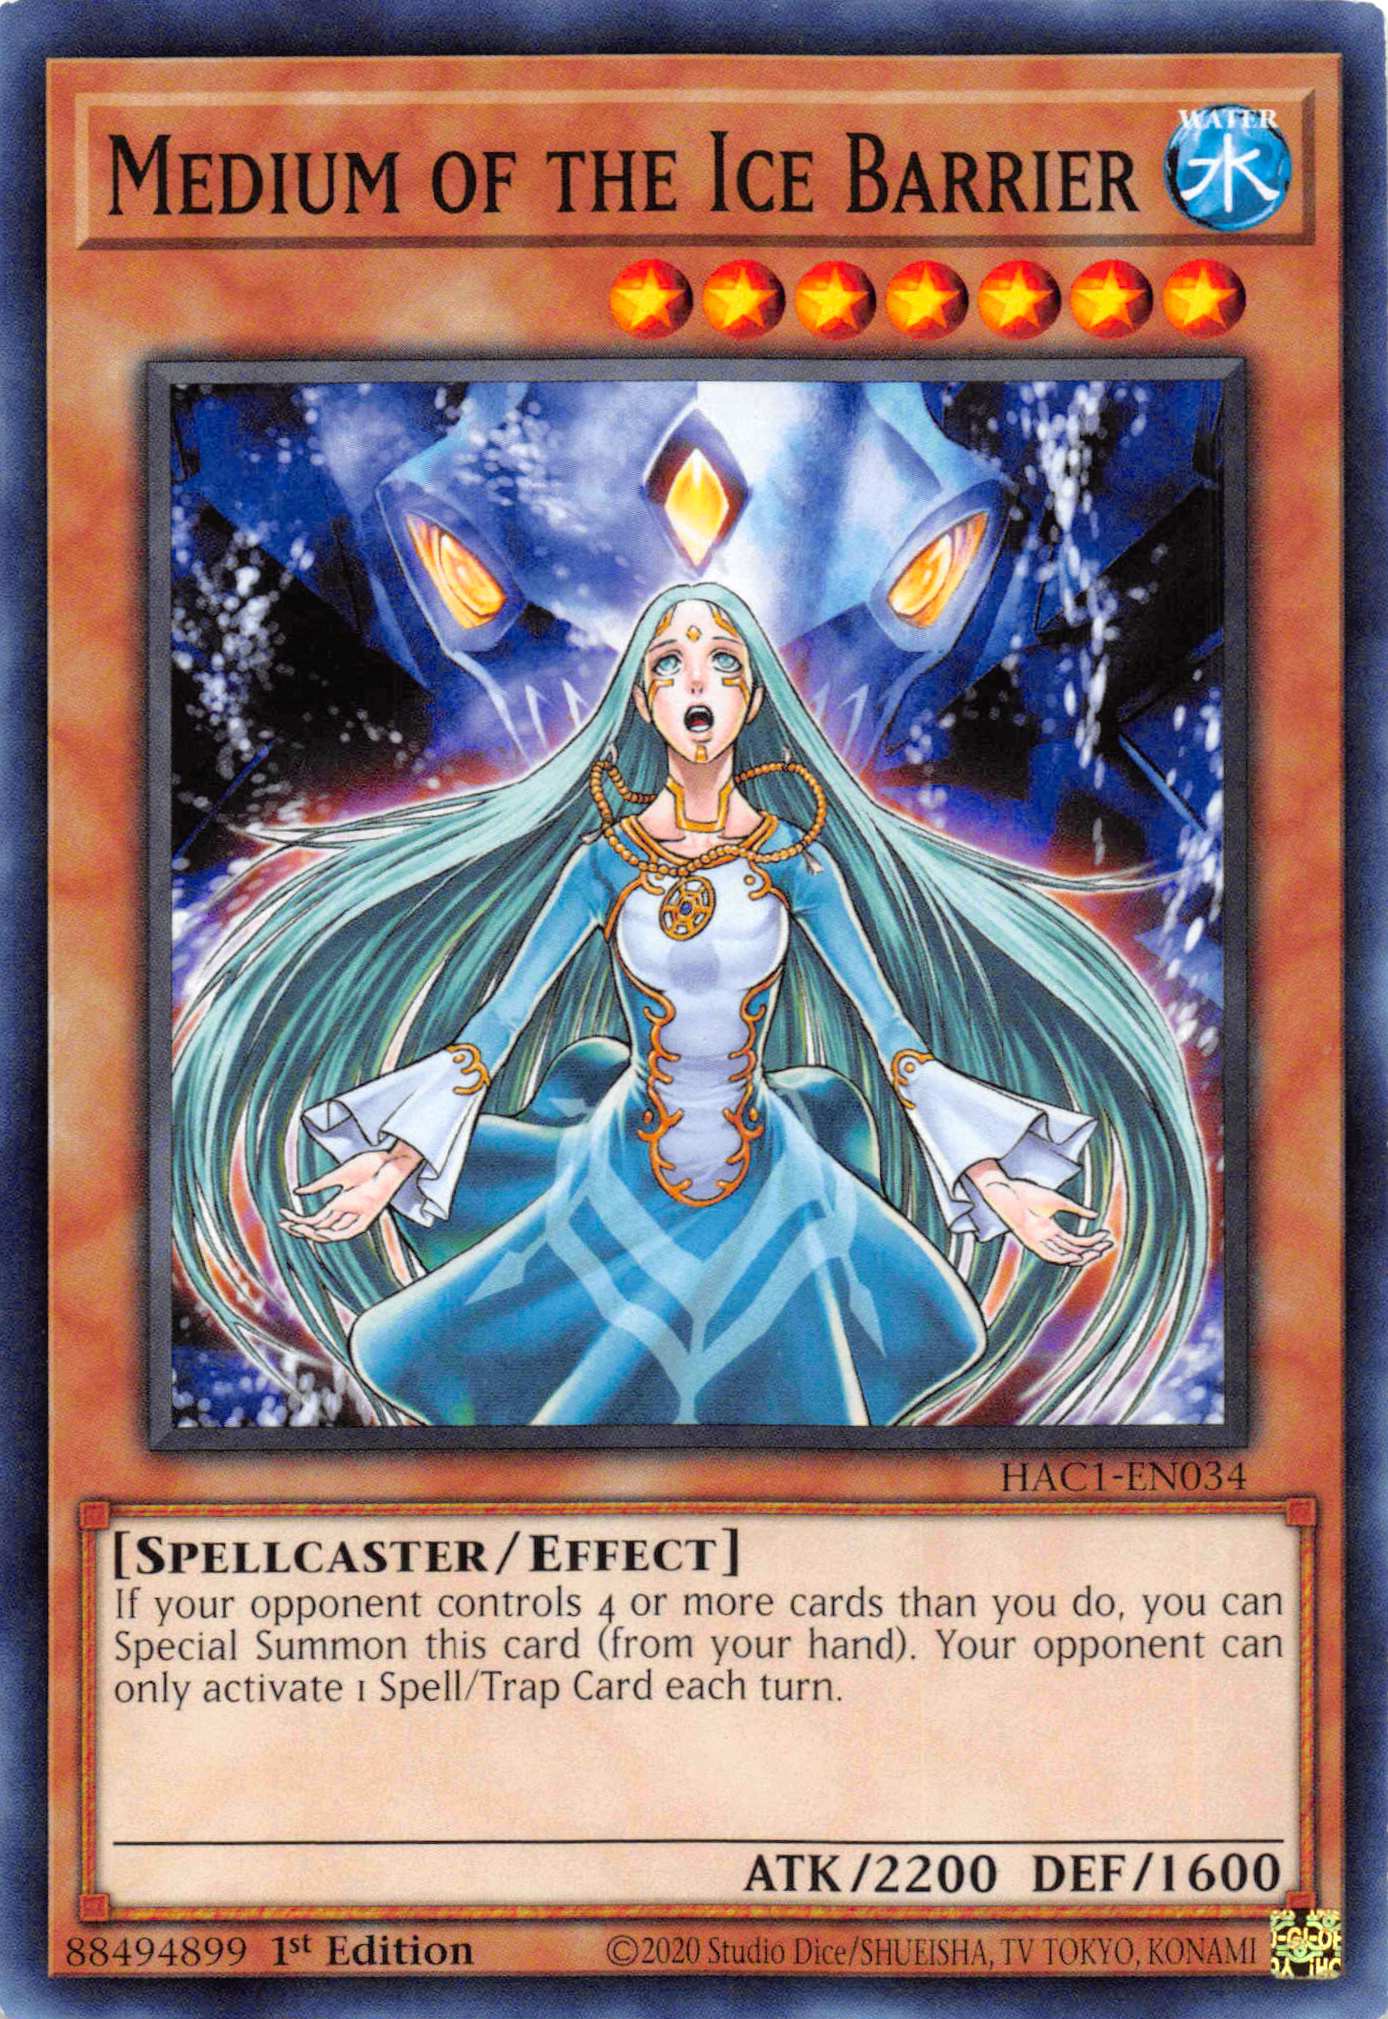 Medium of the Ice Barrier (Duel Terminal) [HAC1-EN034] Parallel Rare | The CG Realm